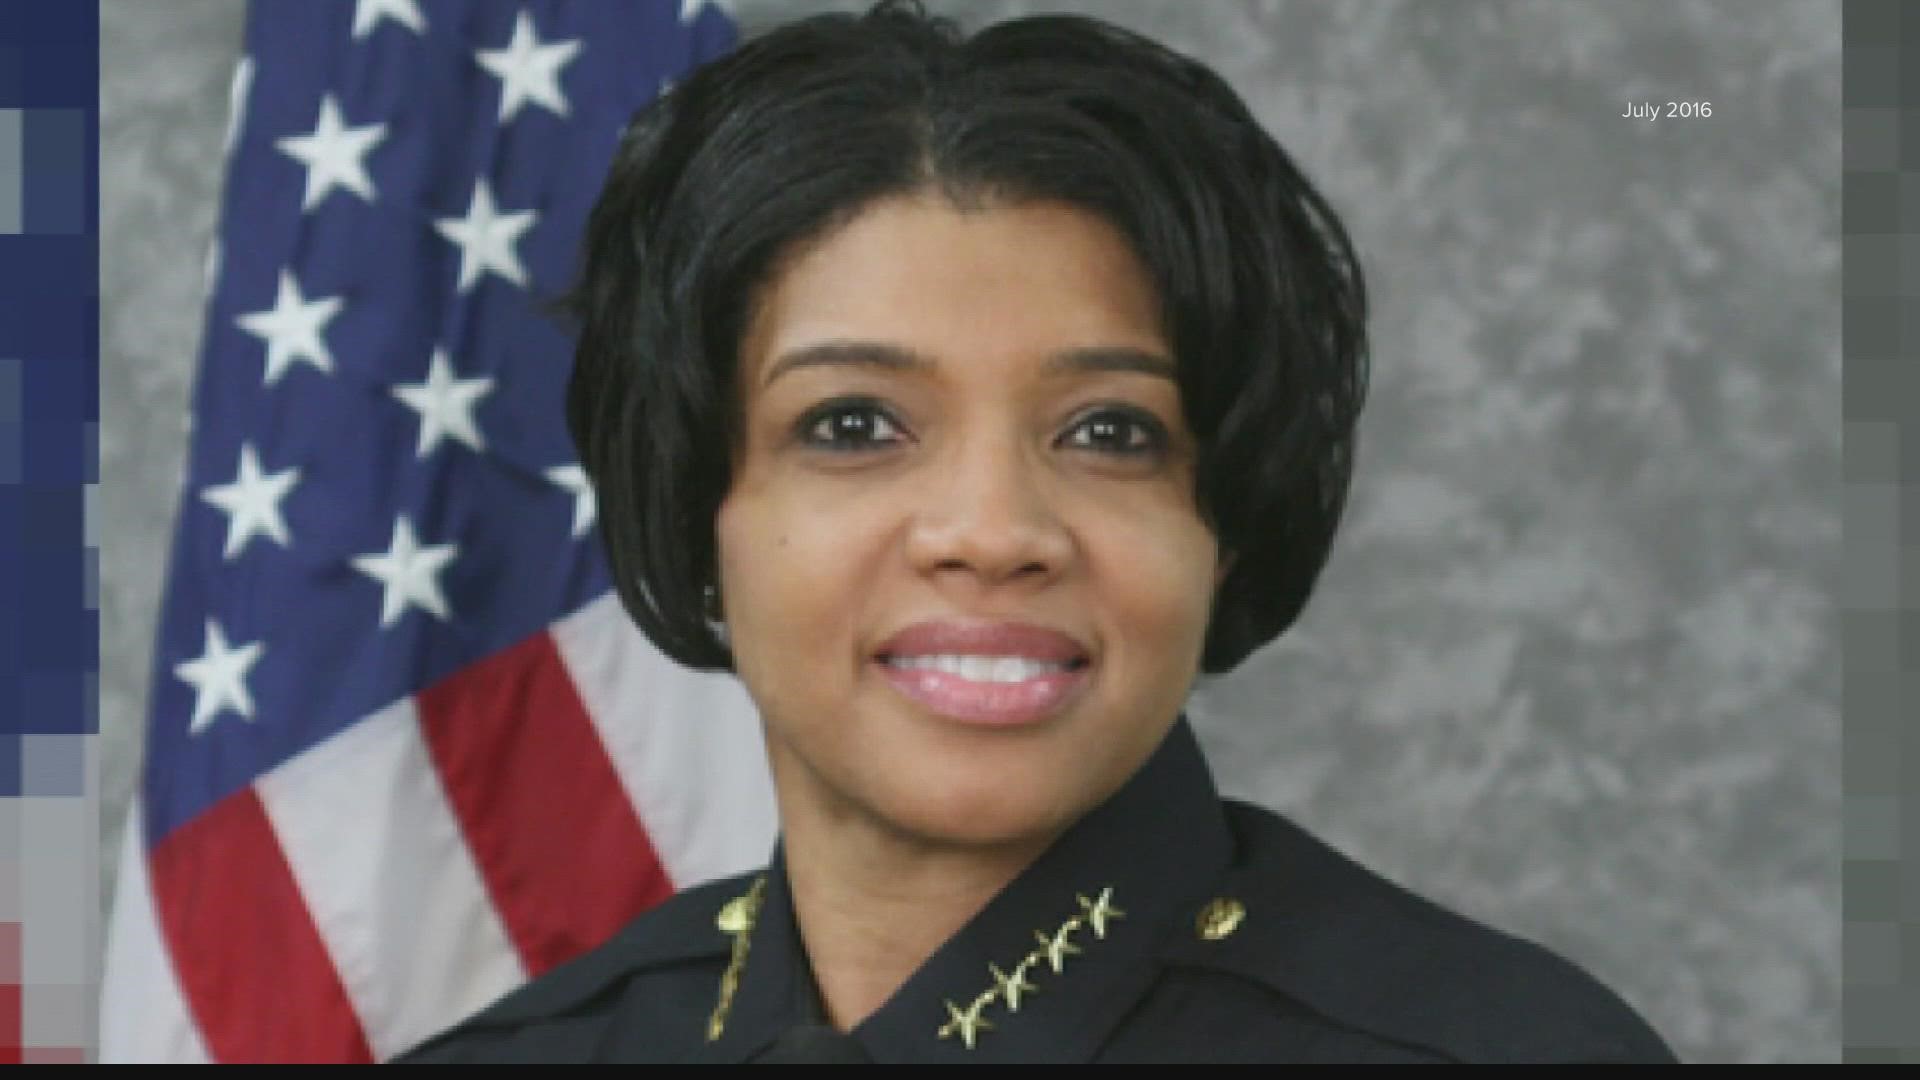 Phoenix Police Chief Jeri Williams has announced her retirement. She said she will leave the department this summer to prioritize family and future endeavors.